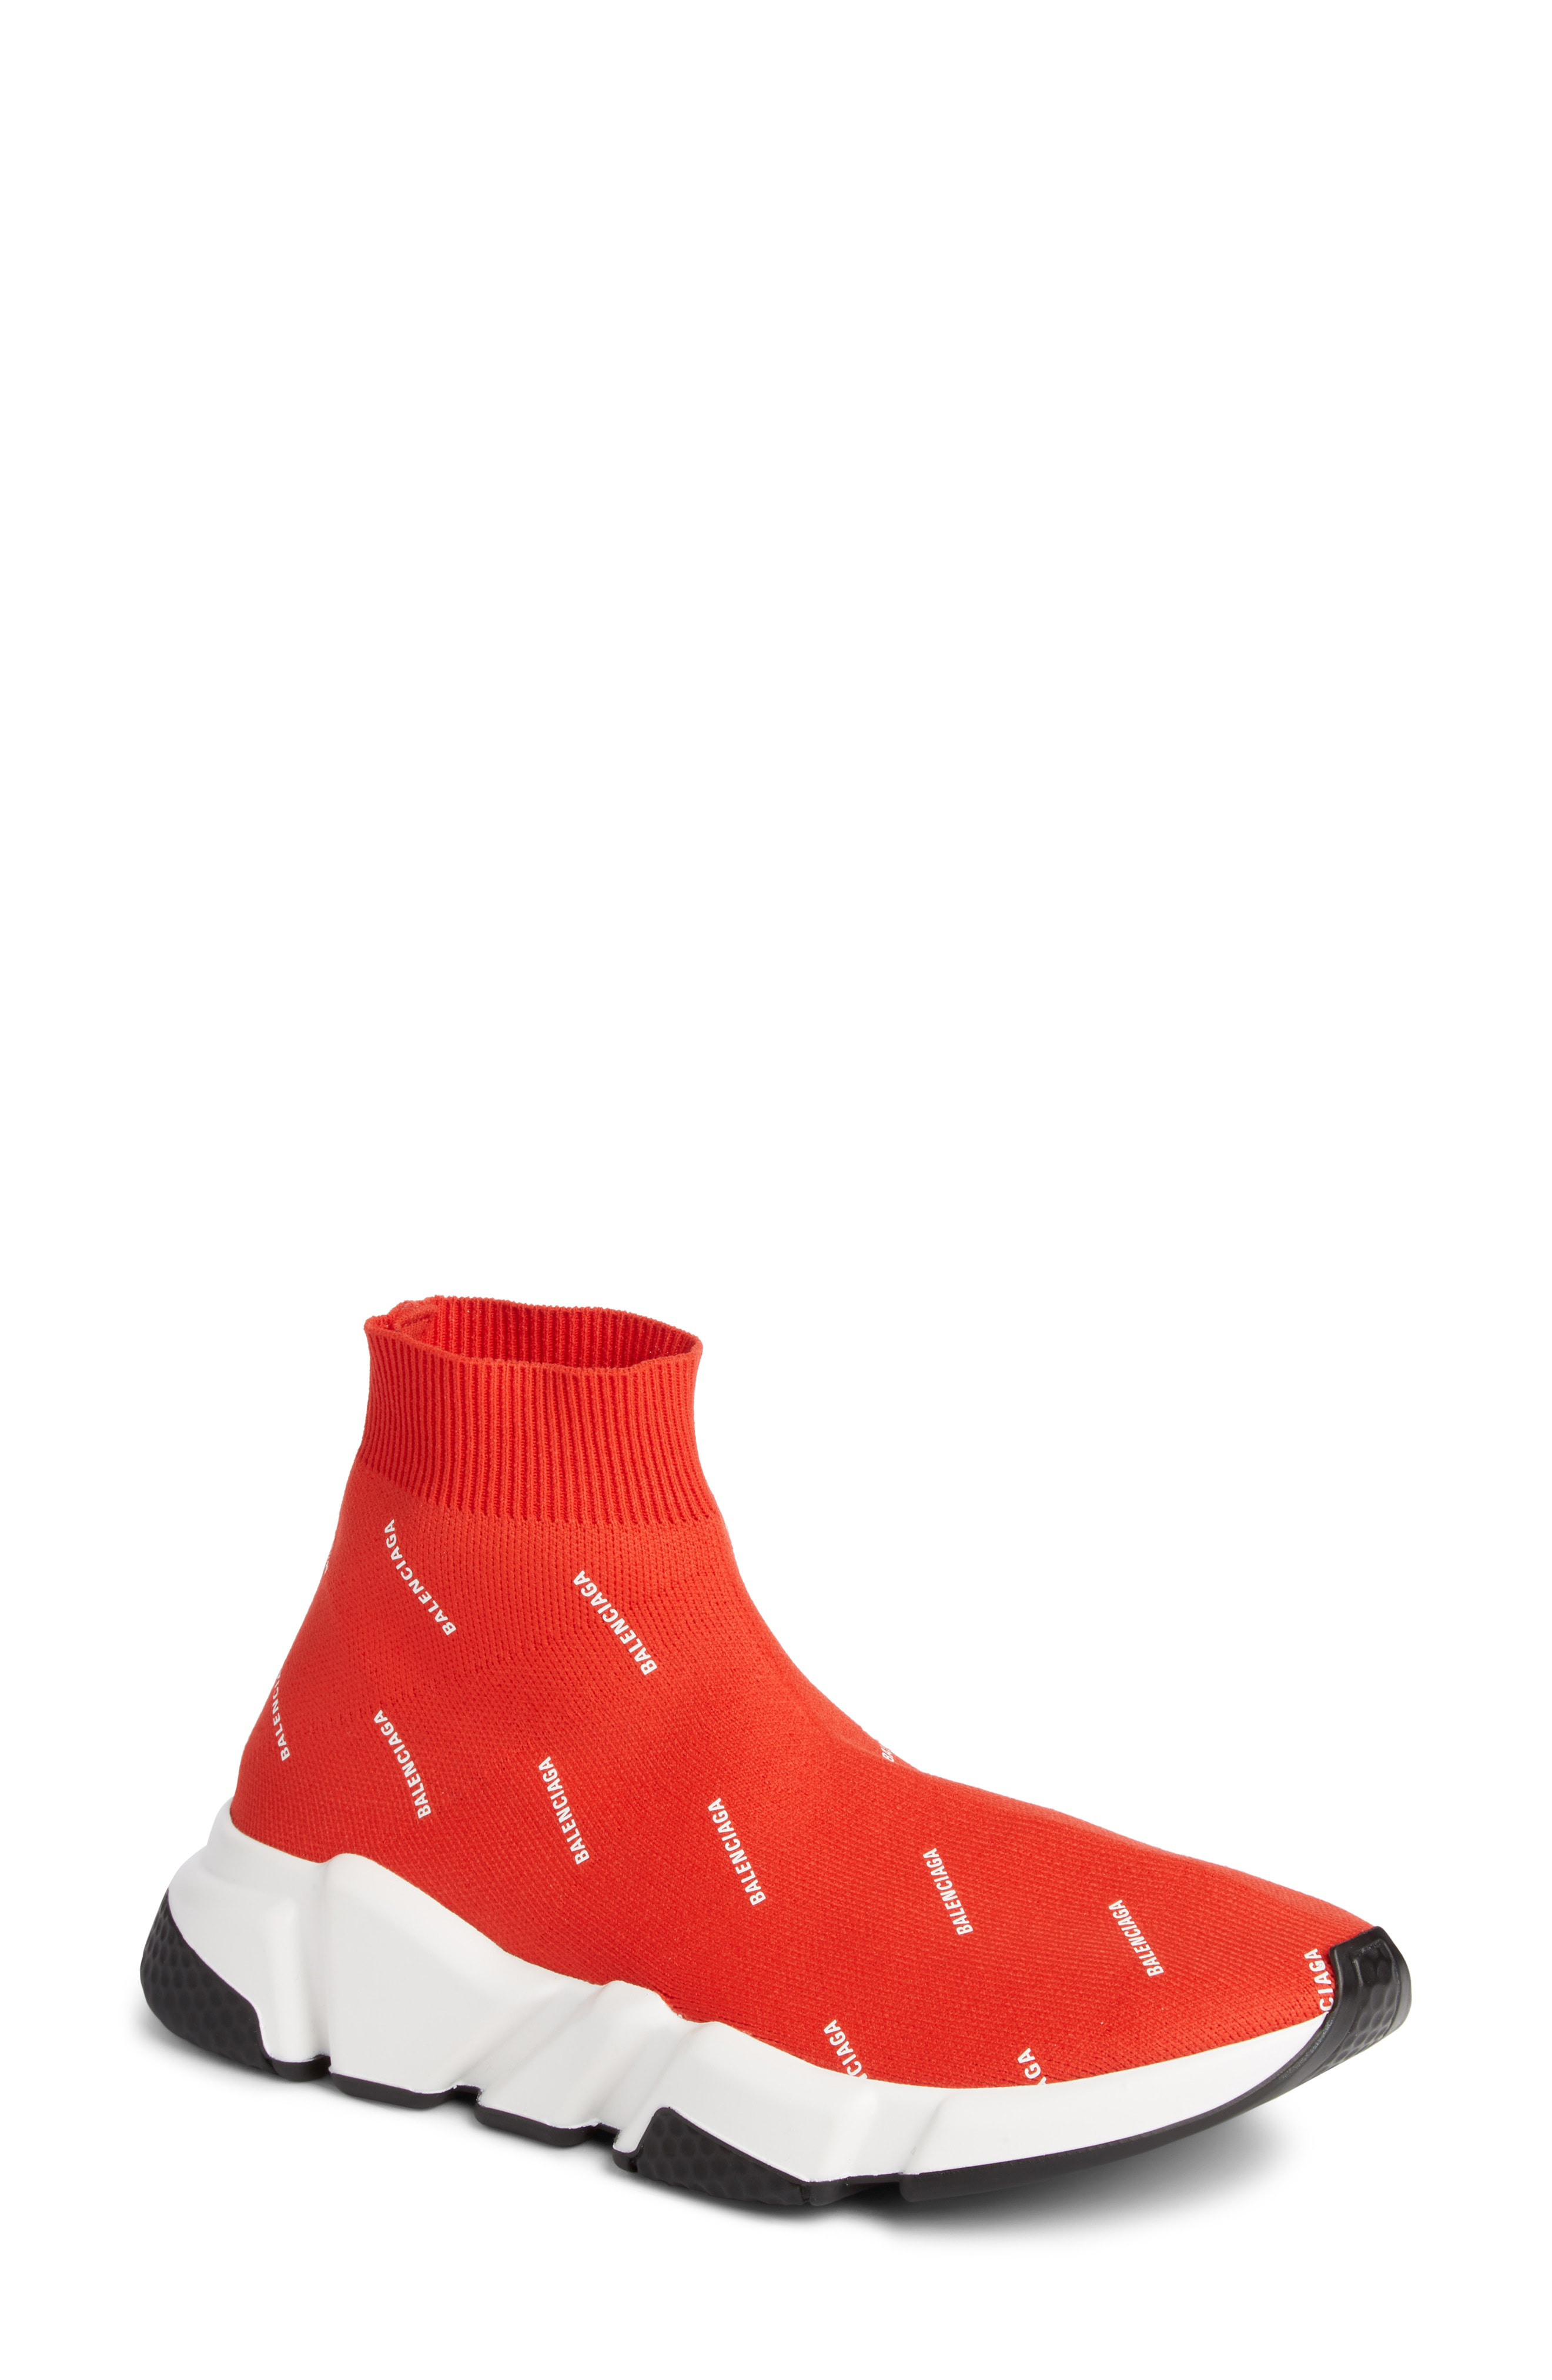 red and white balenciaga sock shoes